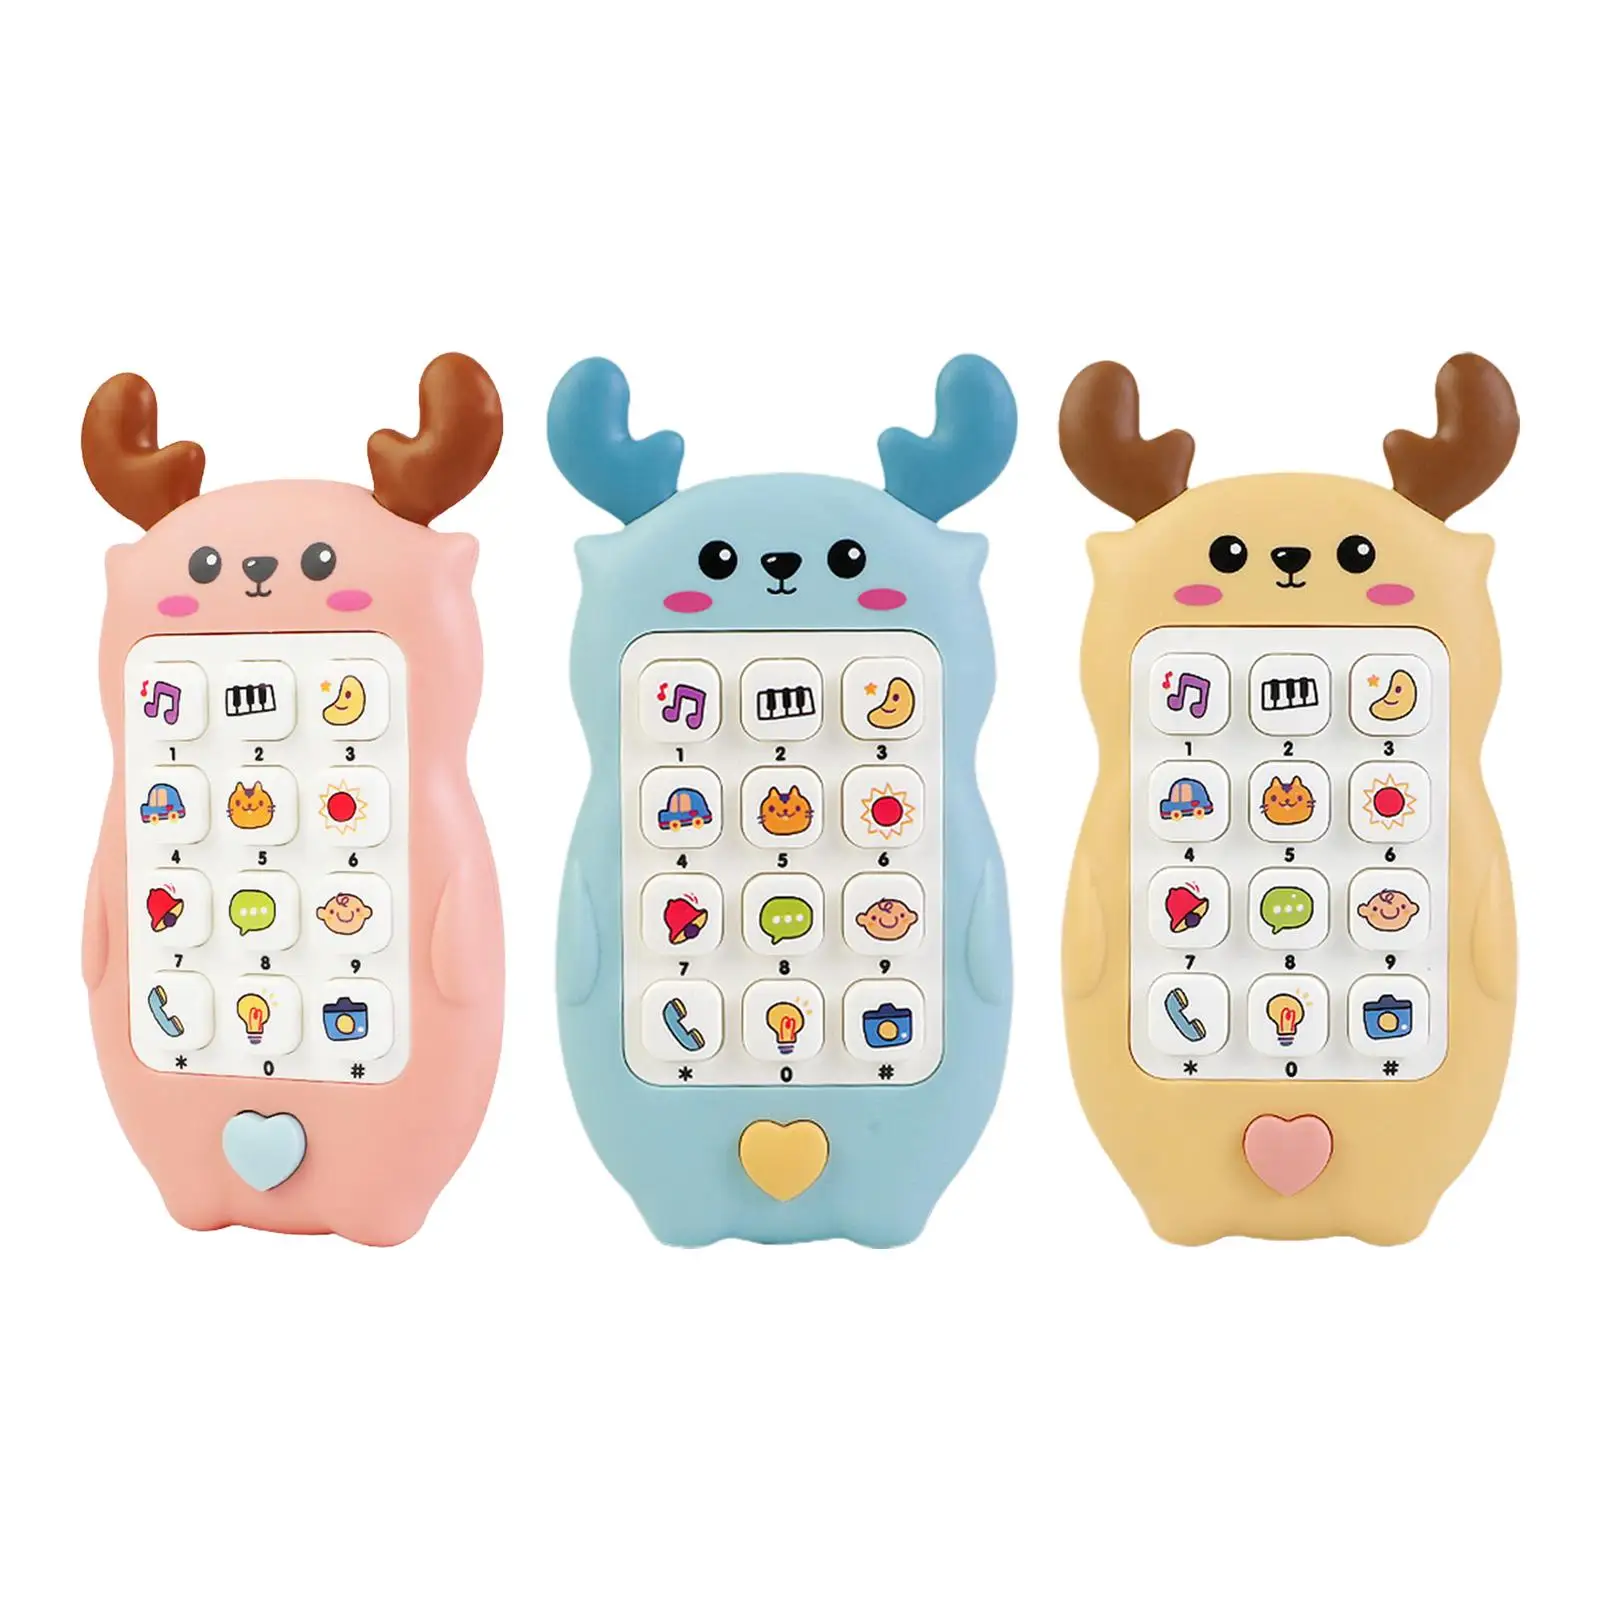 

Smartphone Toys Various Musics Sounds Early Educational Pretend Phone Toys for Toddler 6 Months+ Infants Boys Girls